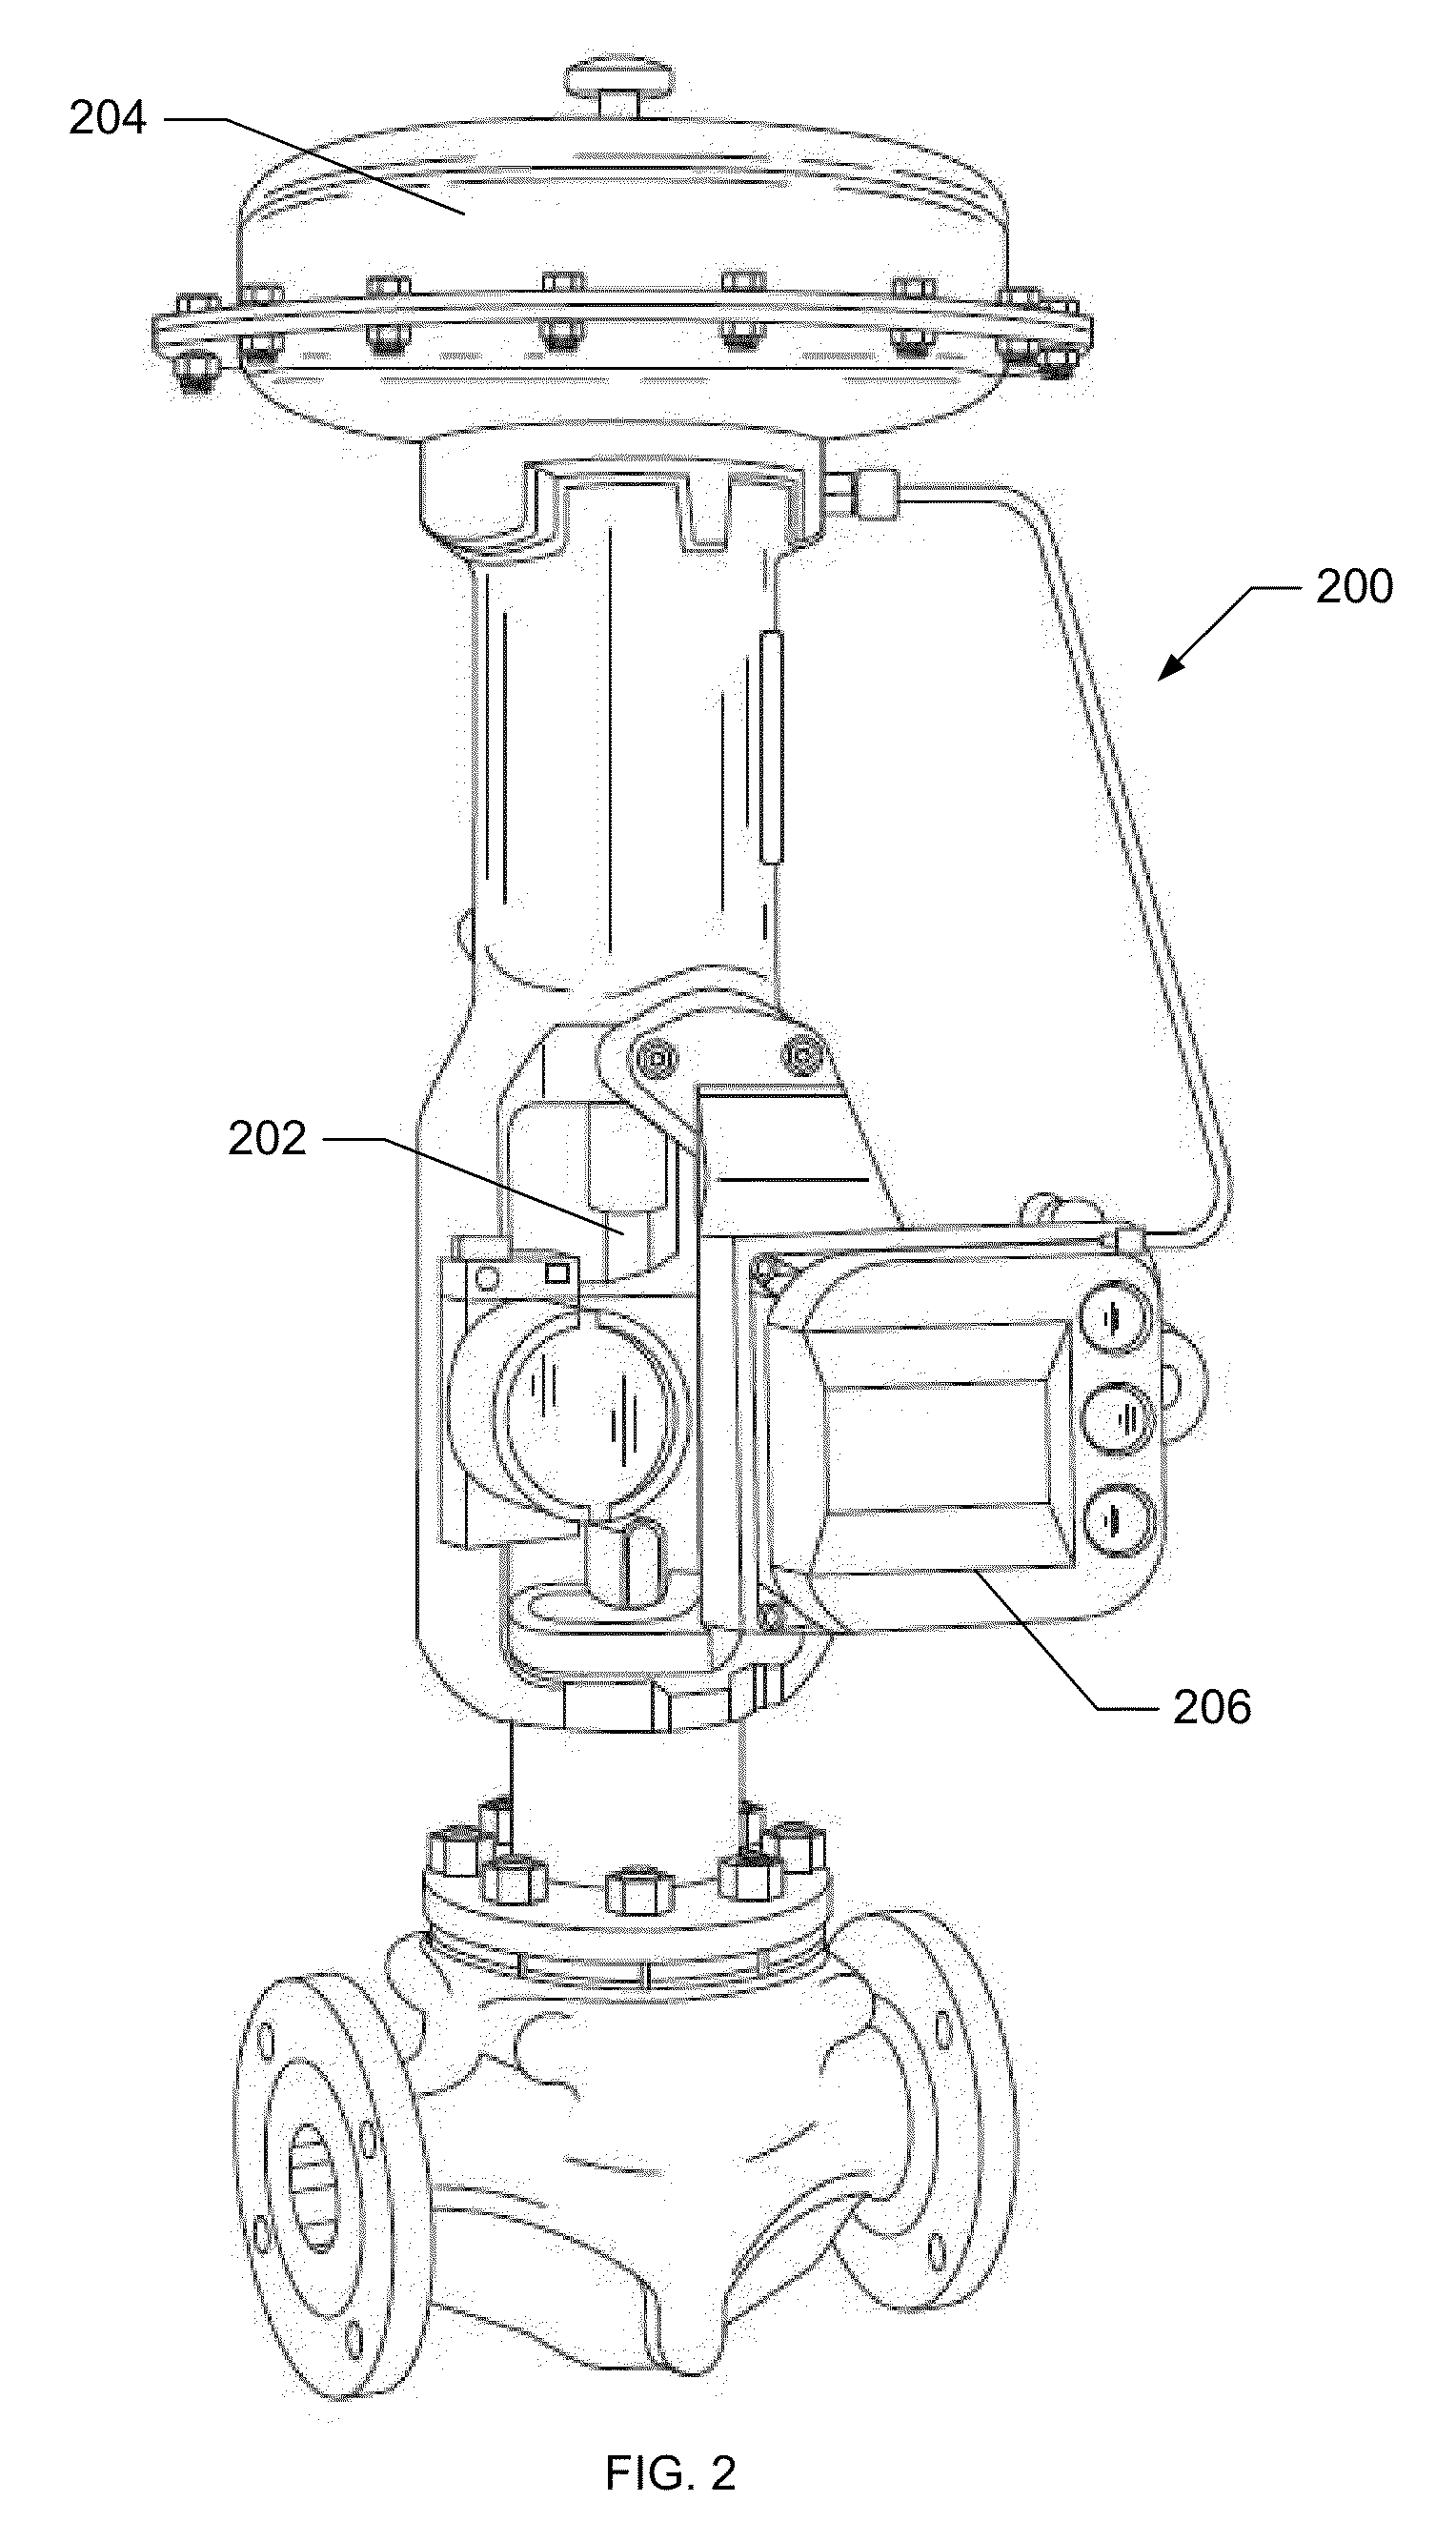 Methods and apparatus for analyzing effects of friction on process control devices